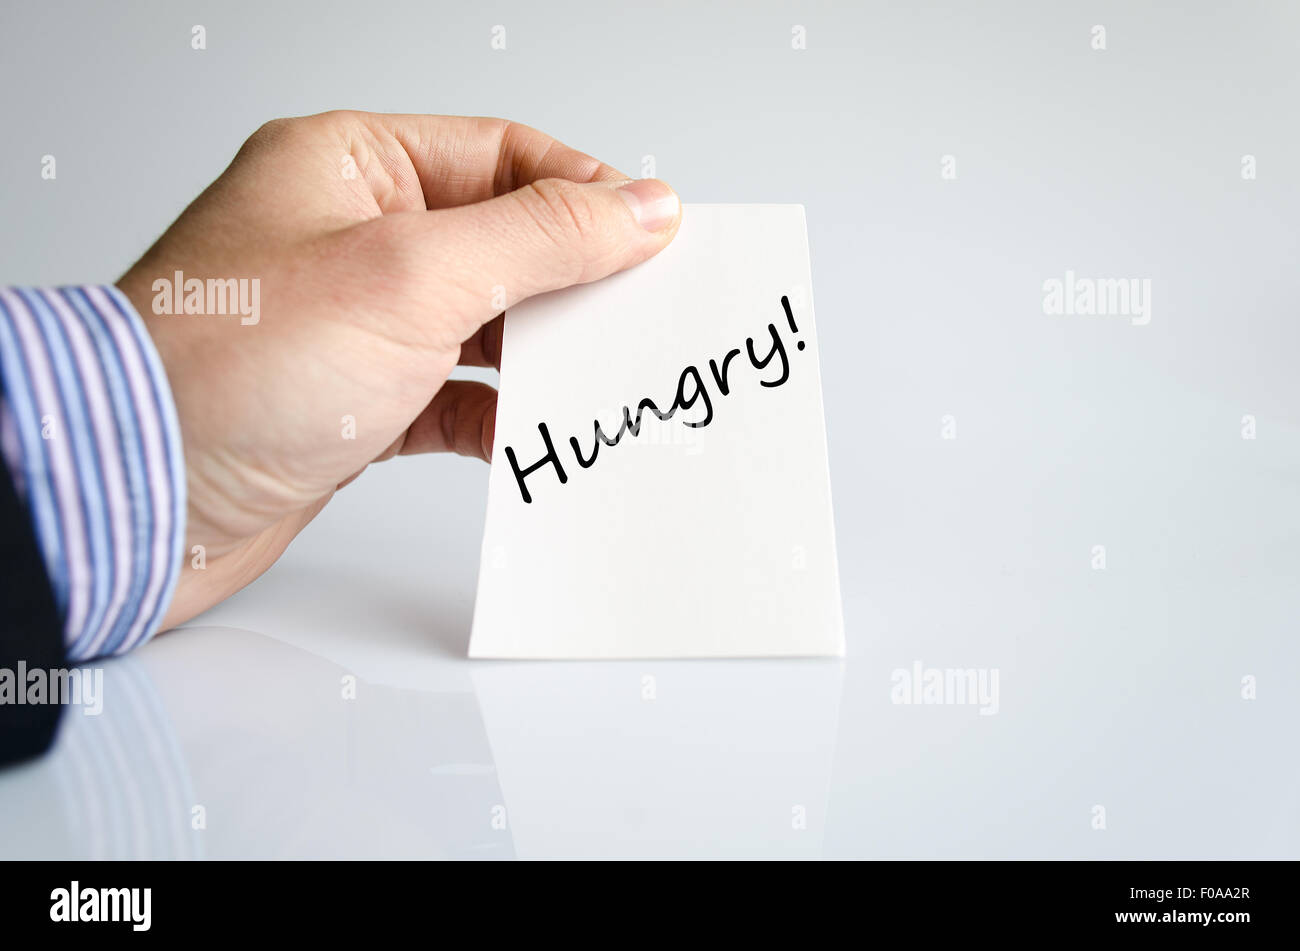 Hungry text concept isolated over white background Stock Photo